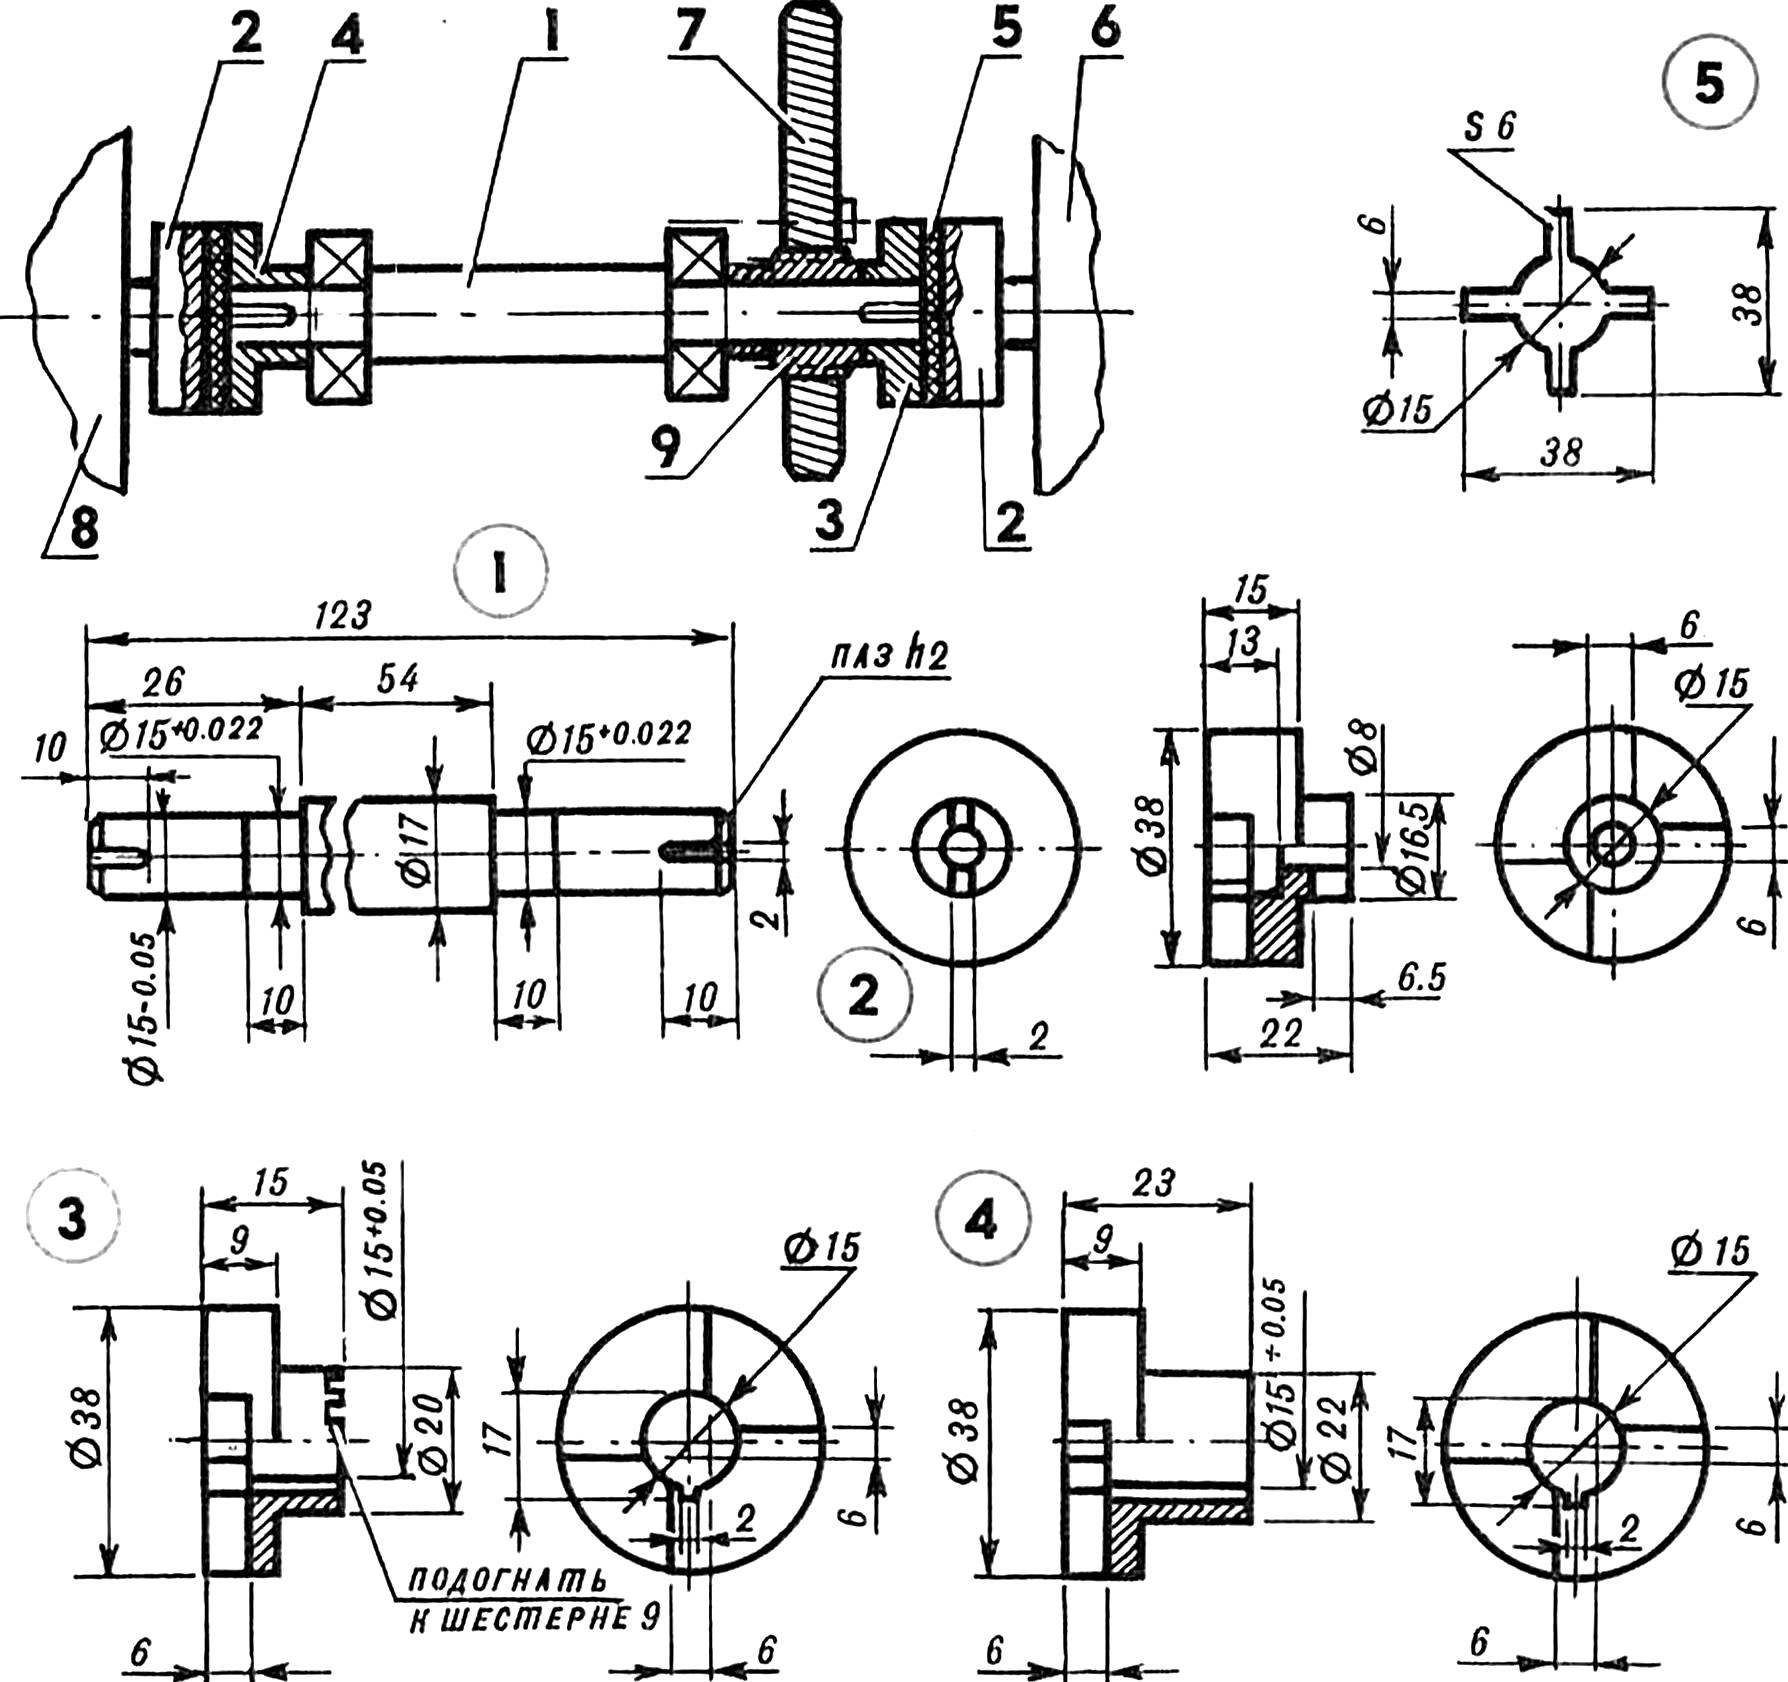 The scheme of installation of electric motors.